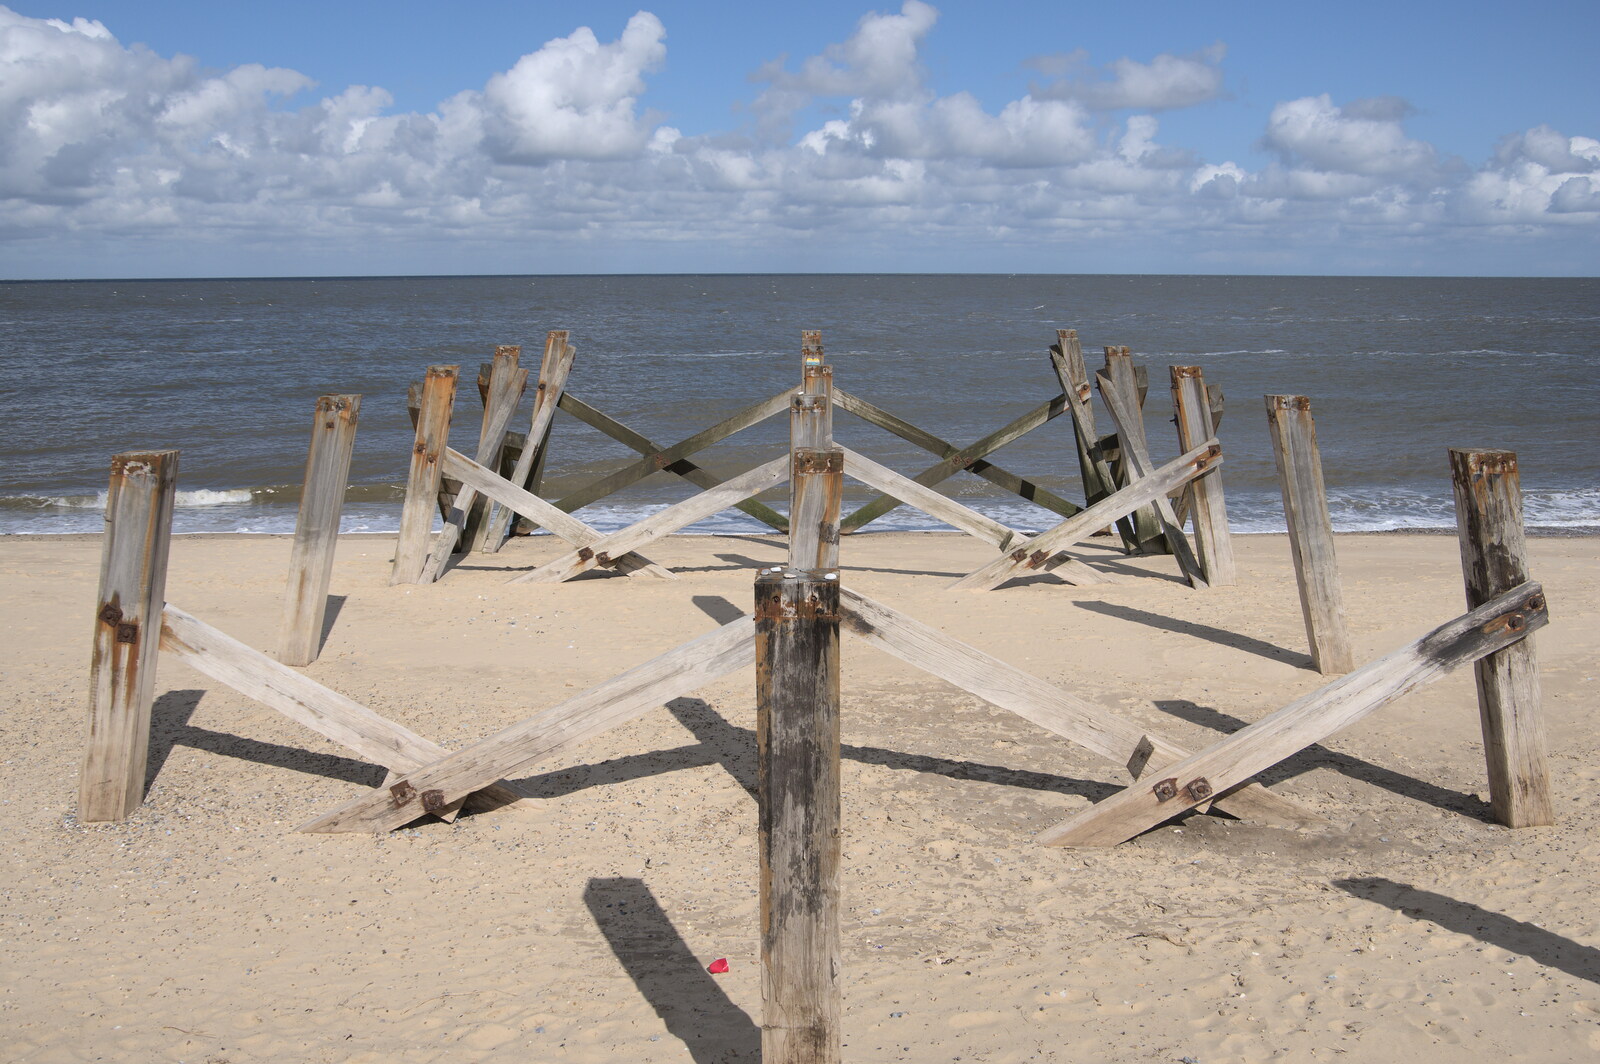 The remains of an old pier from Faded Seaside Glamour: A Weekend in Great Yarmouth, Norfolk - 29th May 2022